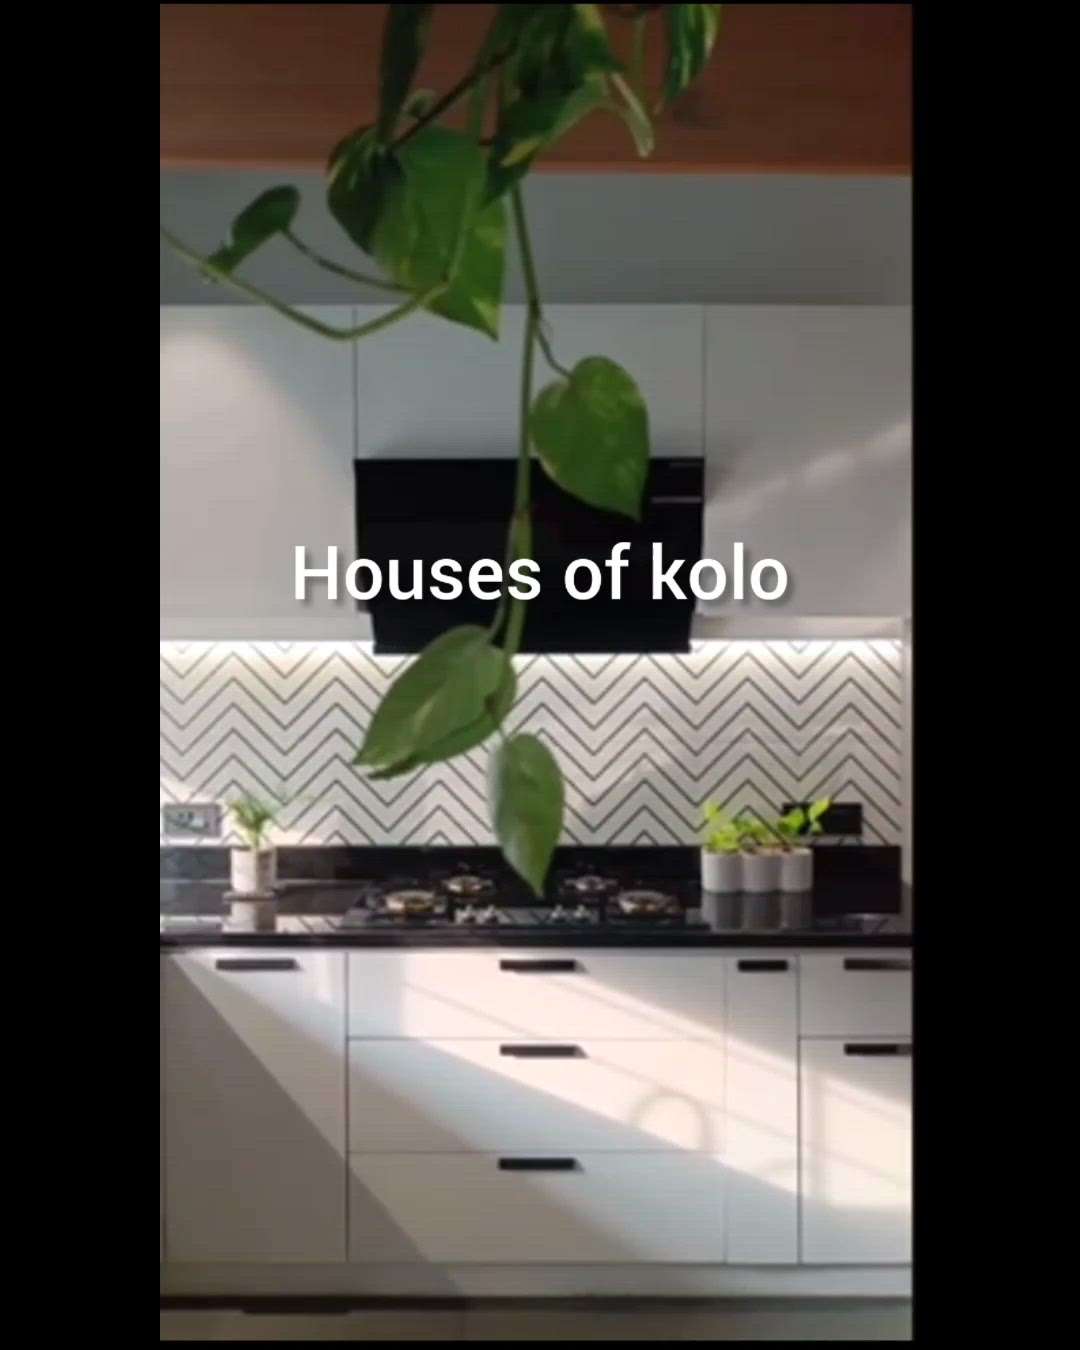 #creatorsofkolo #projects #interior #home #koloprojects #minimalism #ContemporaryStyle #homeprojects #turnkey #kerala
lets see some of the most beautiful home projects from kolo app, minimalism and contemporary styling in a single frame